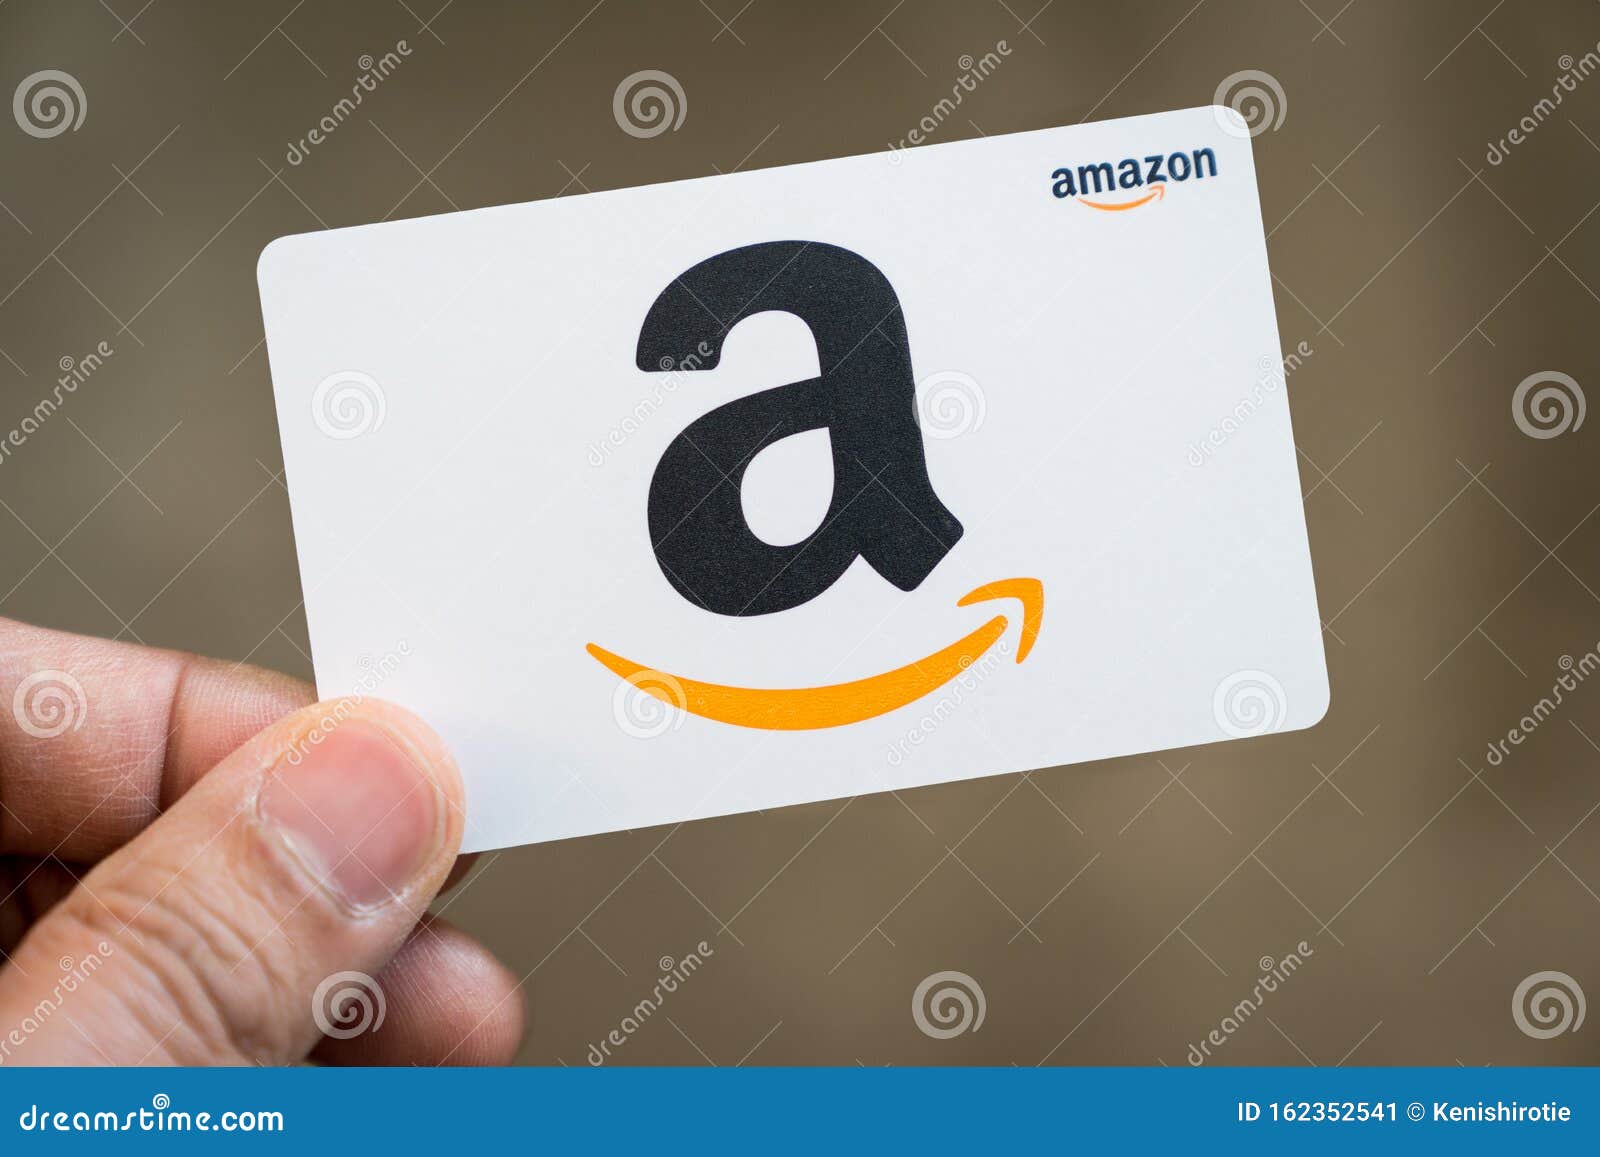 148 Amazon Gift Card Photos Free Royalty Free Stock Photos From Dreamstime